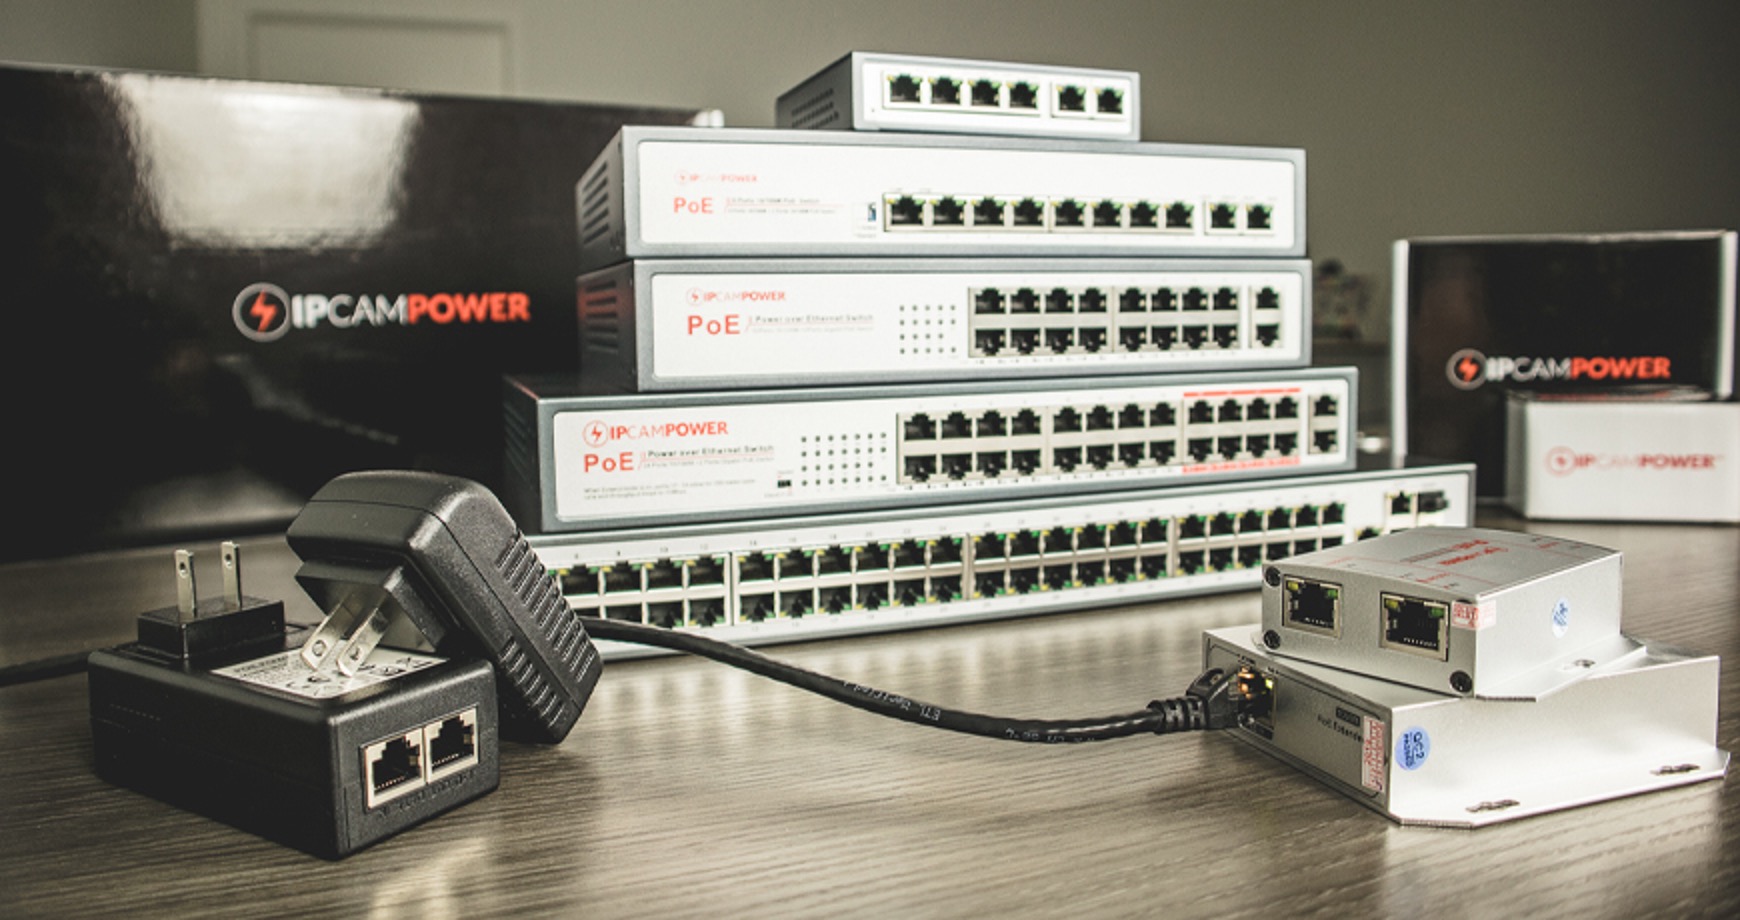 How To Connect A PoE Camera To A Standard Network Switch